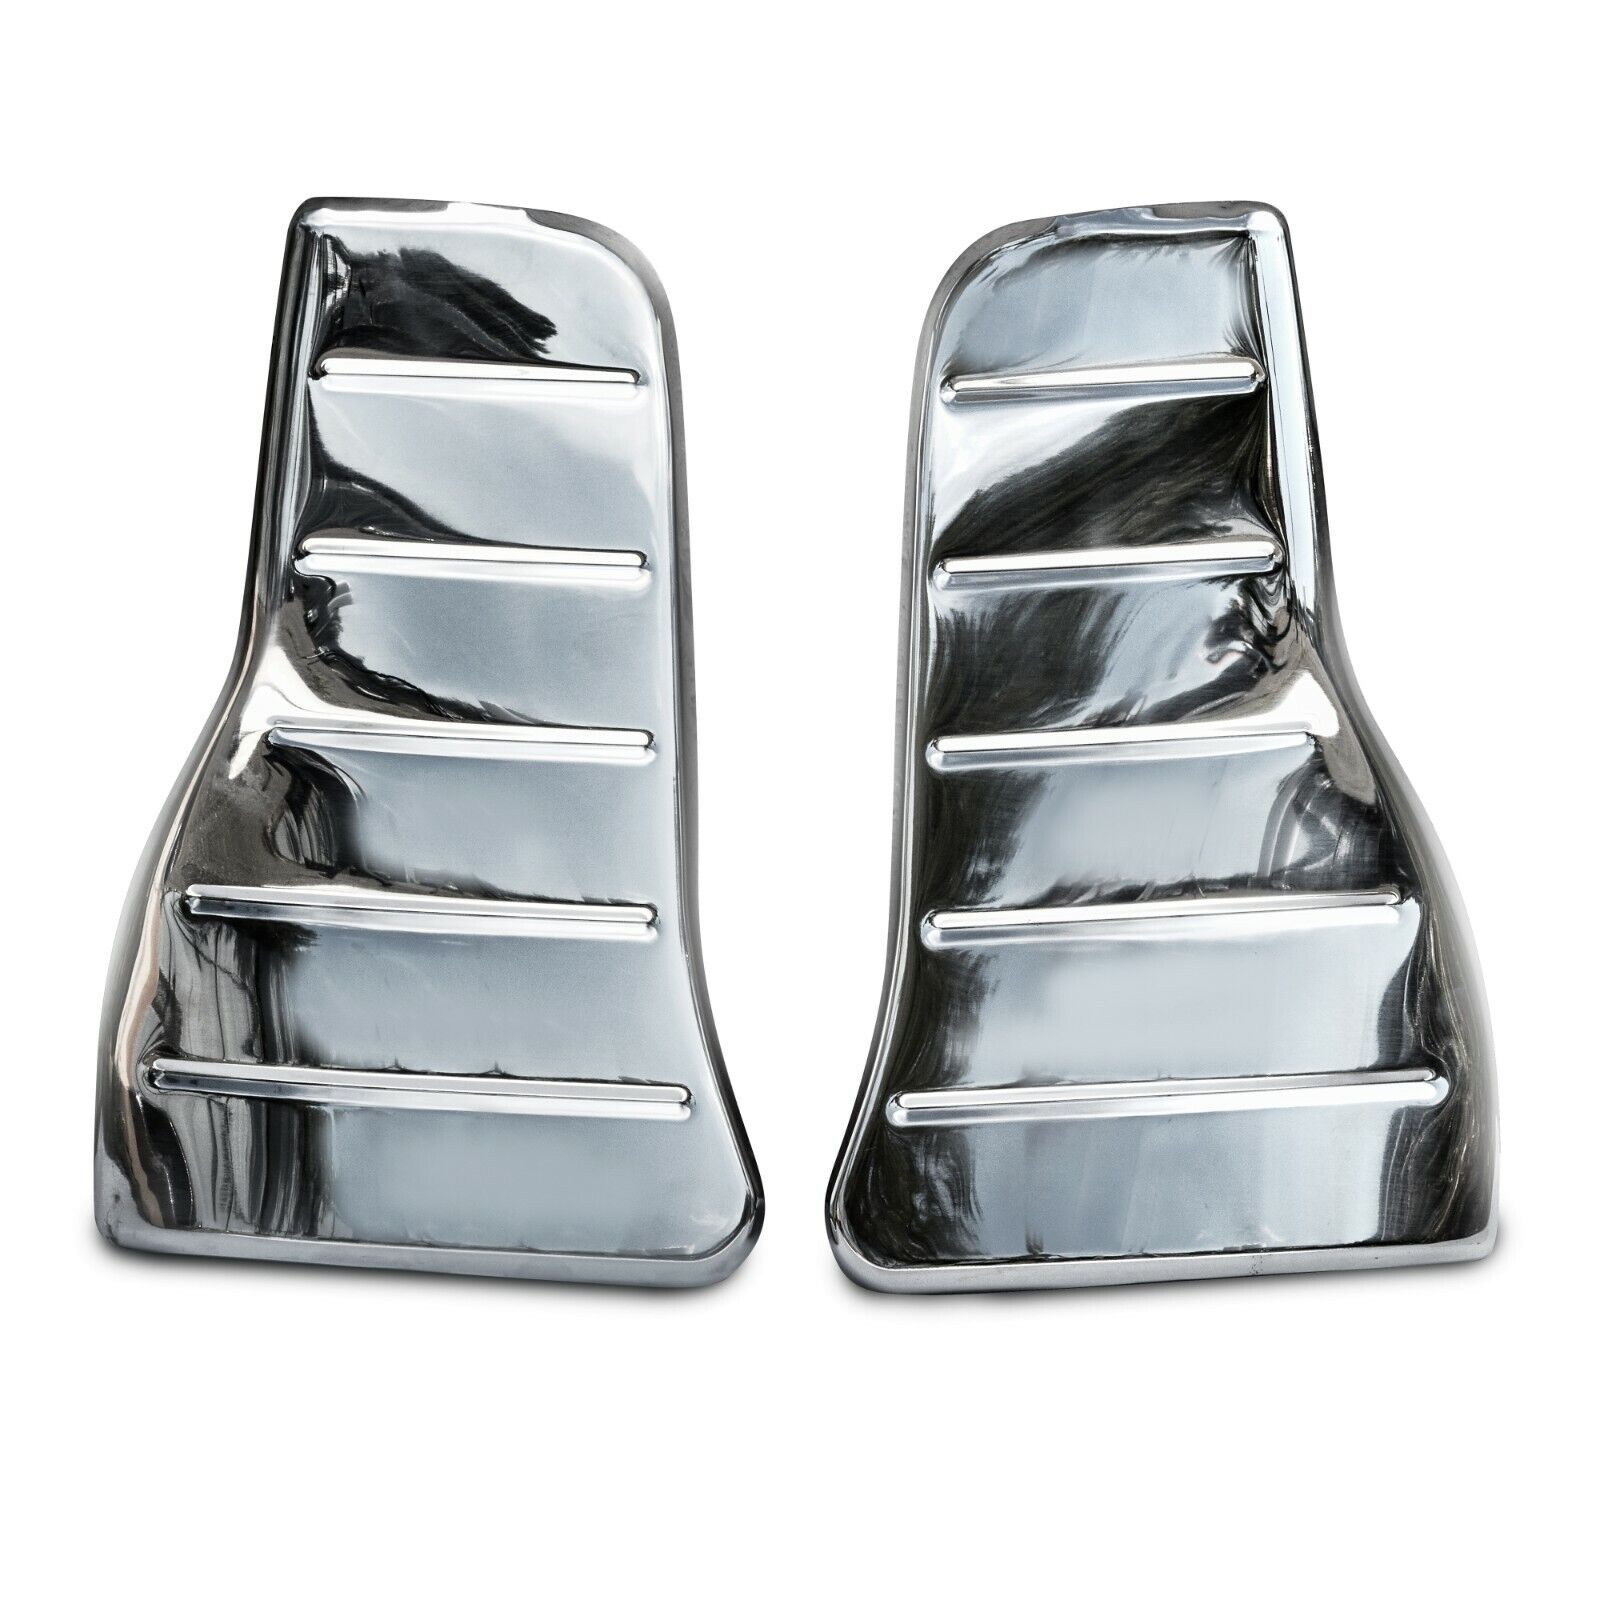 FOR 1946 1947 1948 PLYMOUTH P15 BRAND NEW PAIR STONE/GRAVEL SHIELDS